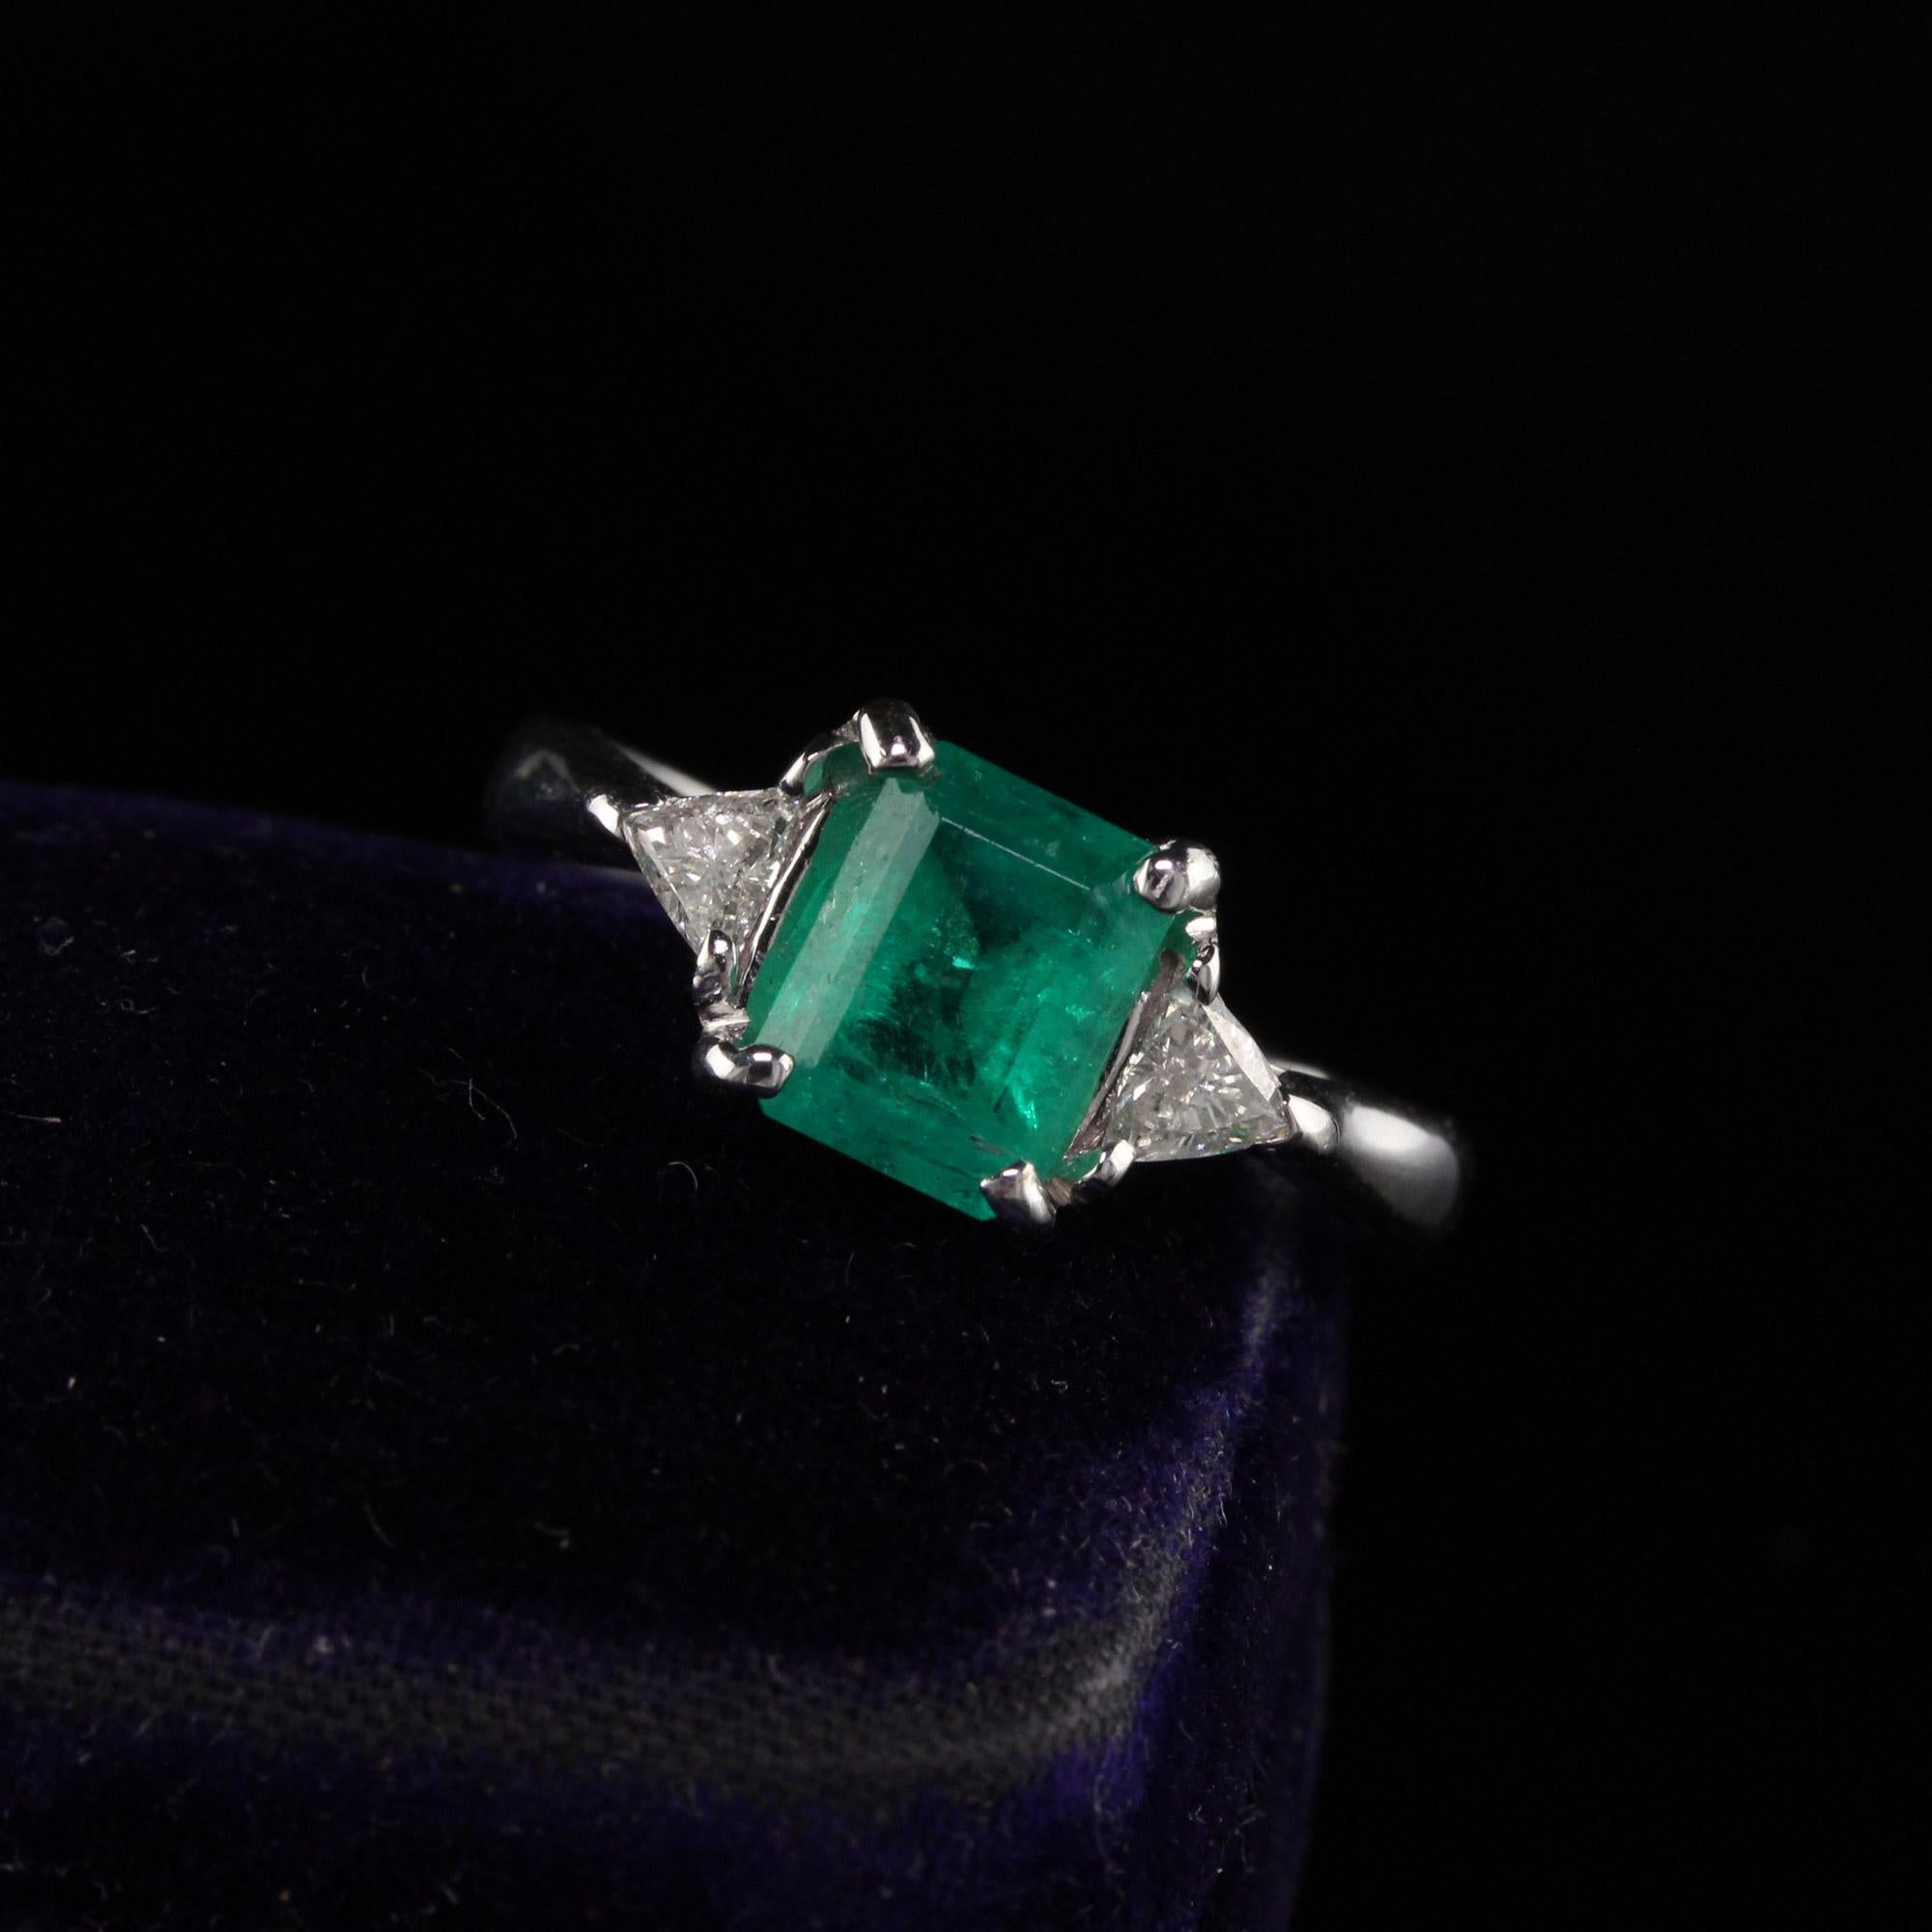 Beautifully designed diamond ring with emerald center stone.

Metal: 14K White Gold

Weight: 4.1 Grams

Total Diamond Weight: Approximately 0.20 ct.

Diamond Color: H

Diamond Clarity: SI1

Gemstone Weight: Approximately 1 ct. emerald

Ring Size: